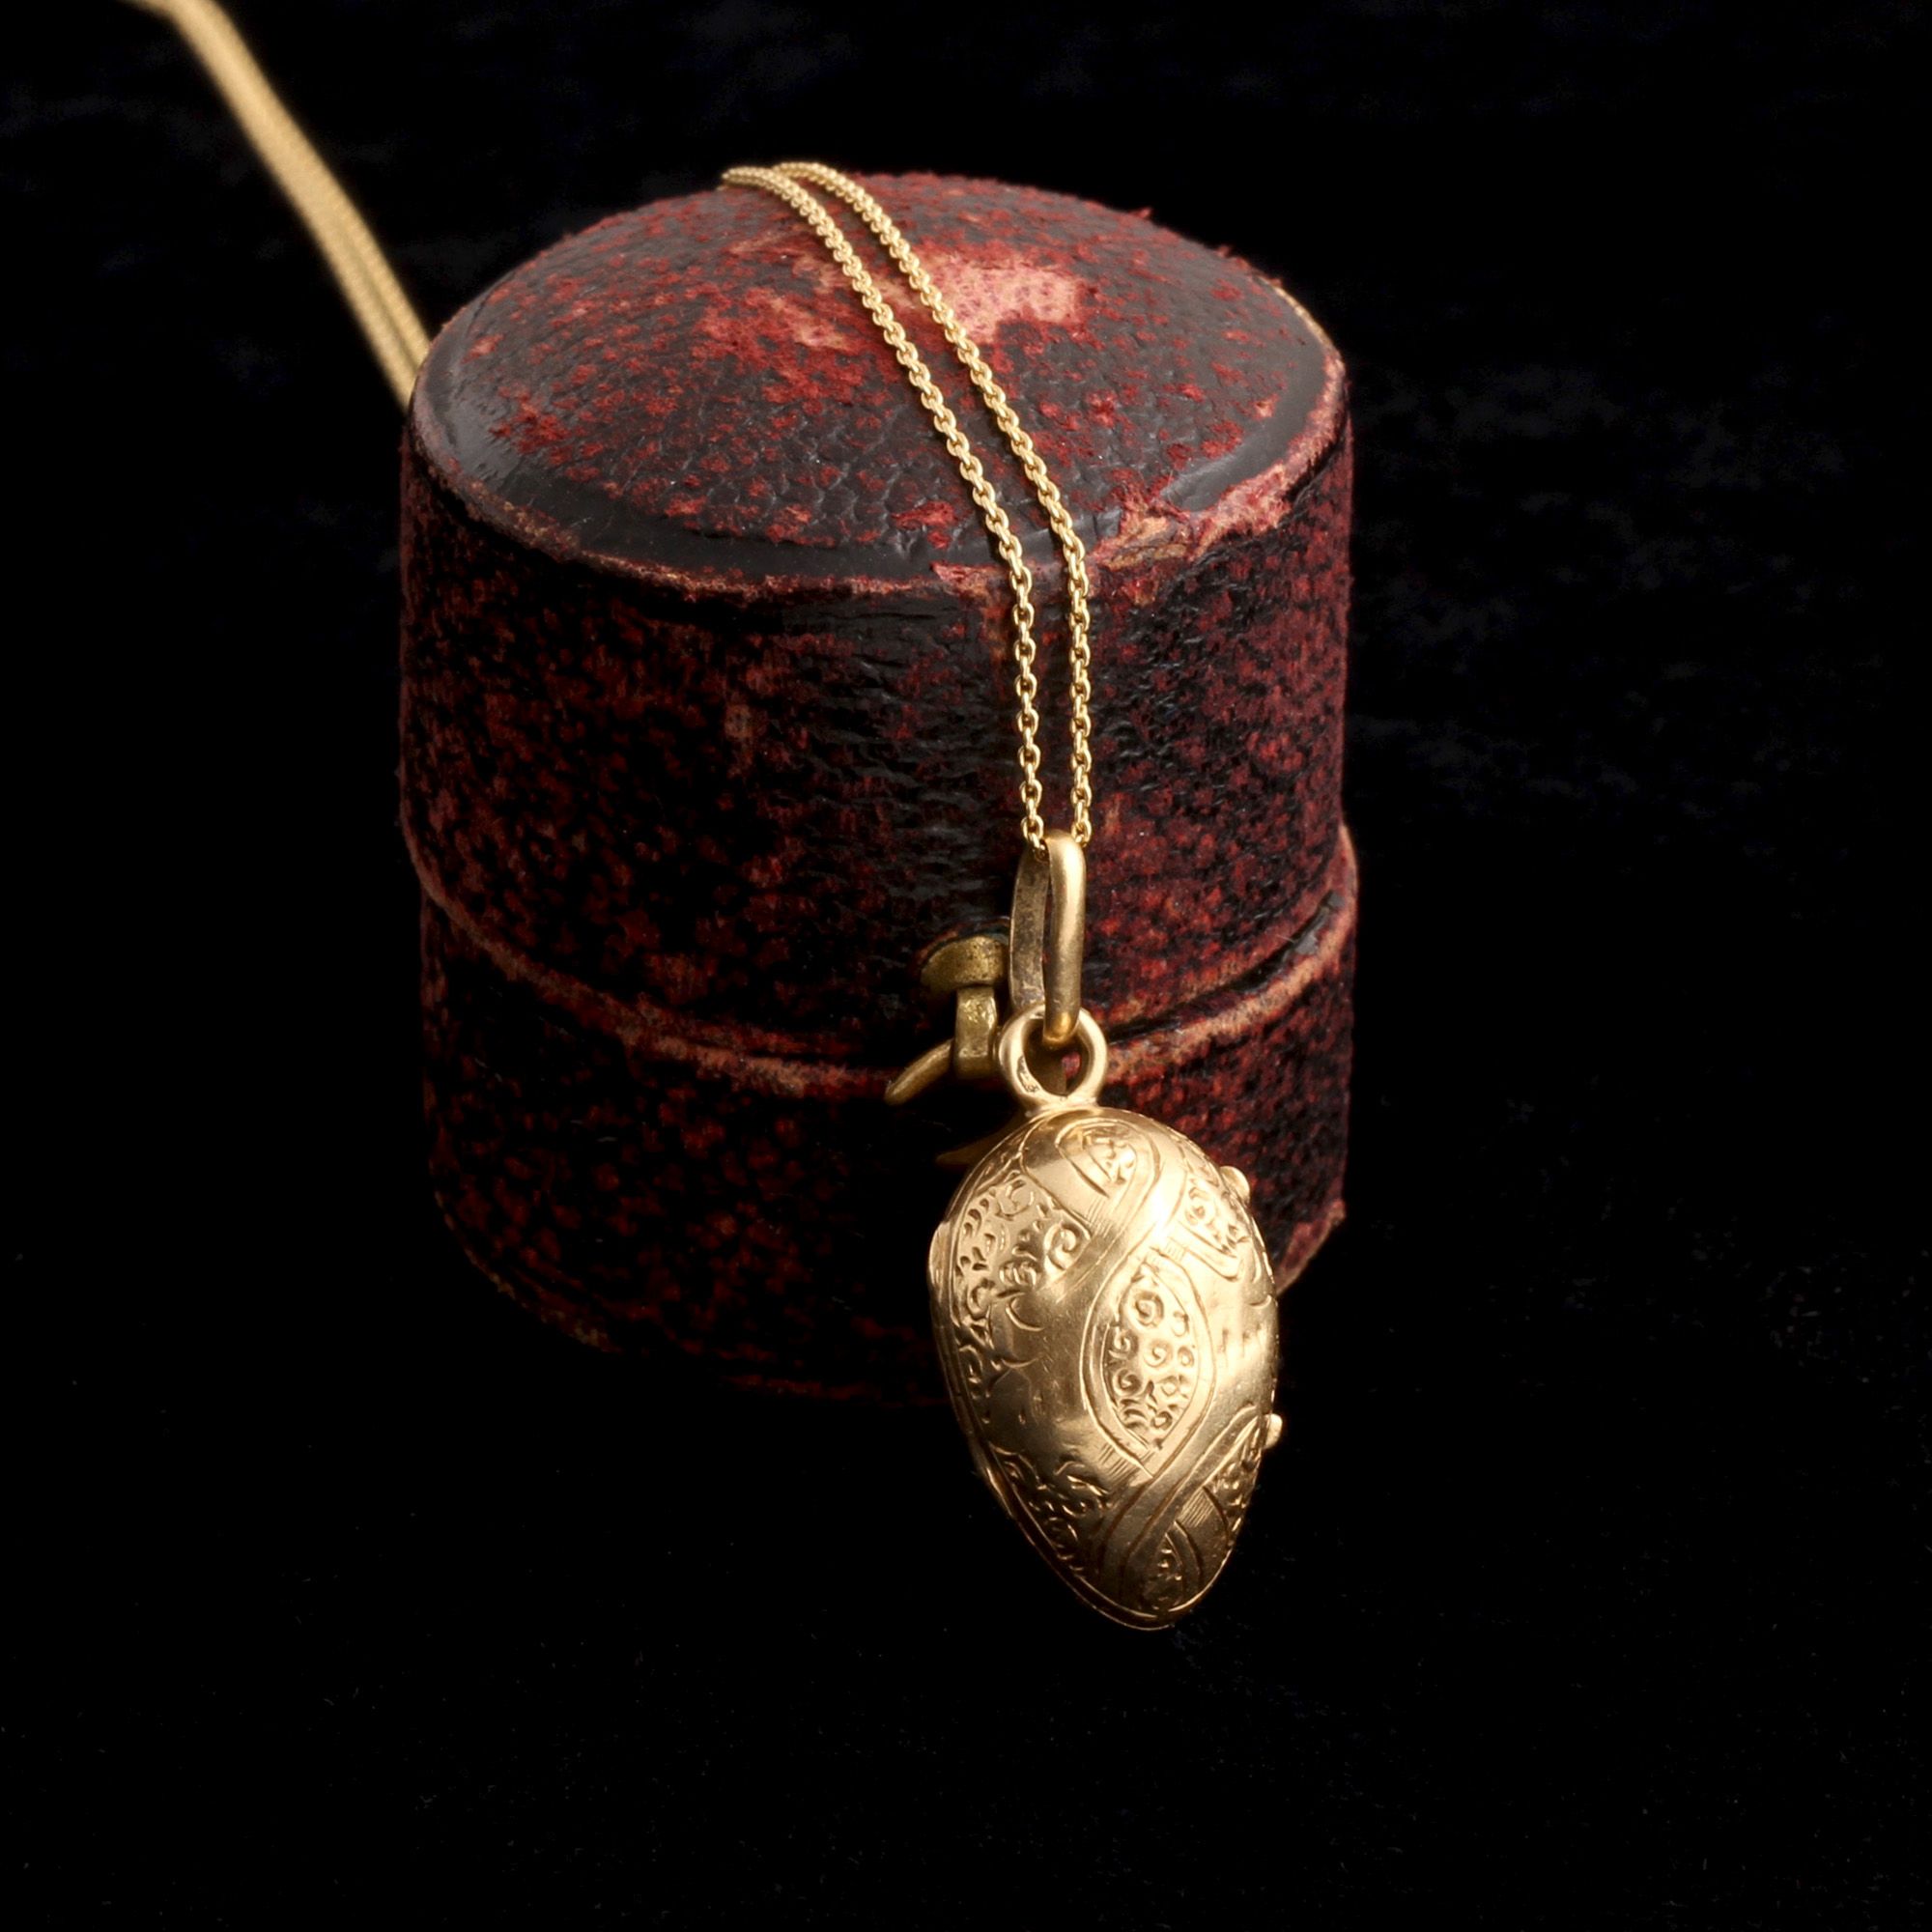 Late 19th Century French Egg-Shaped Locket Necklace